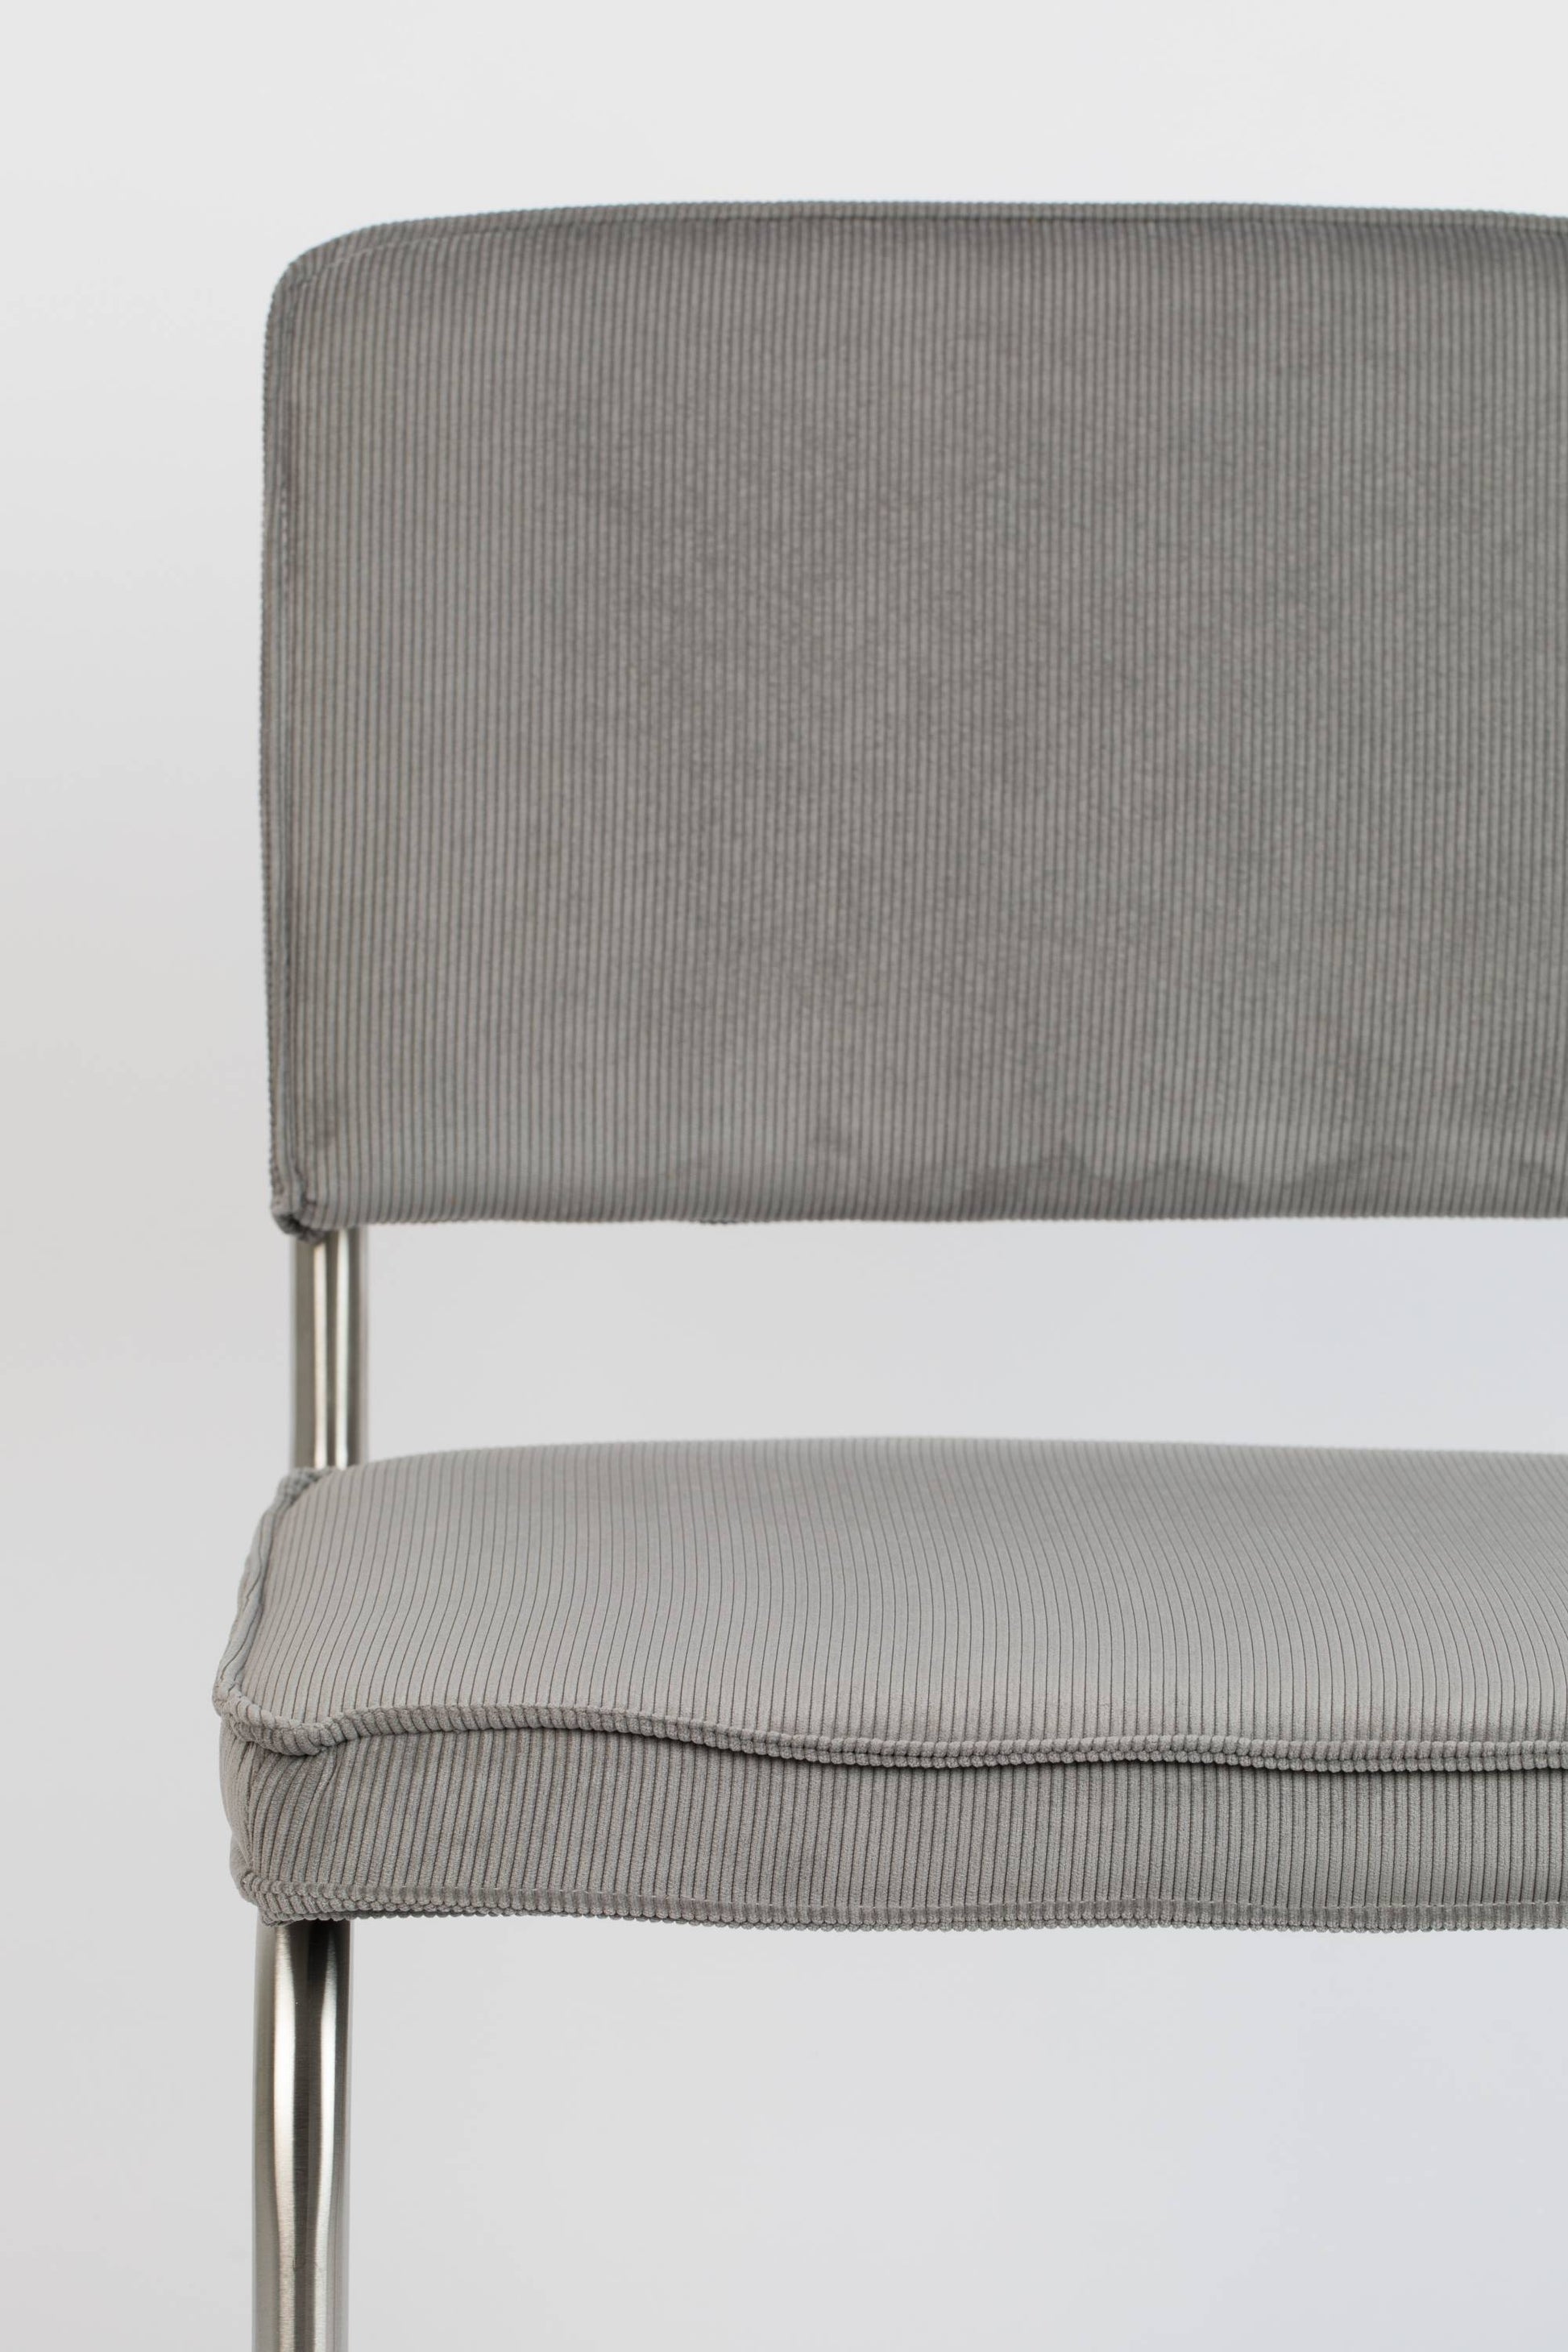 Zuiver | CHAIR RIDGE BRUSHED RIB COOL GREY 32A Default Title